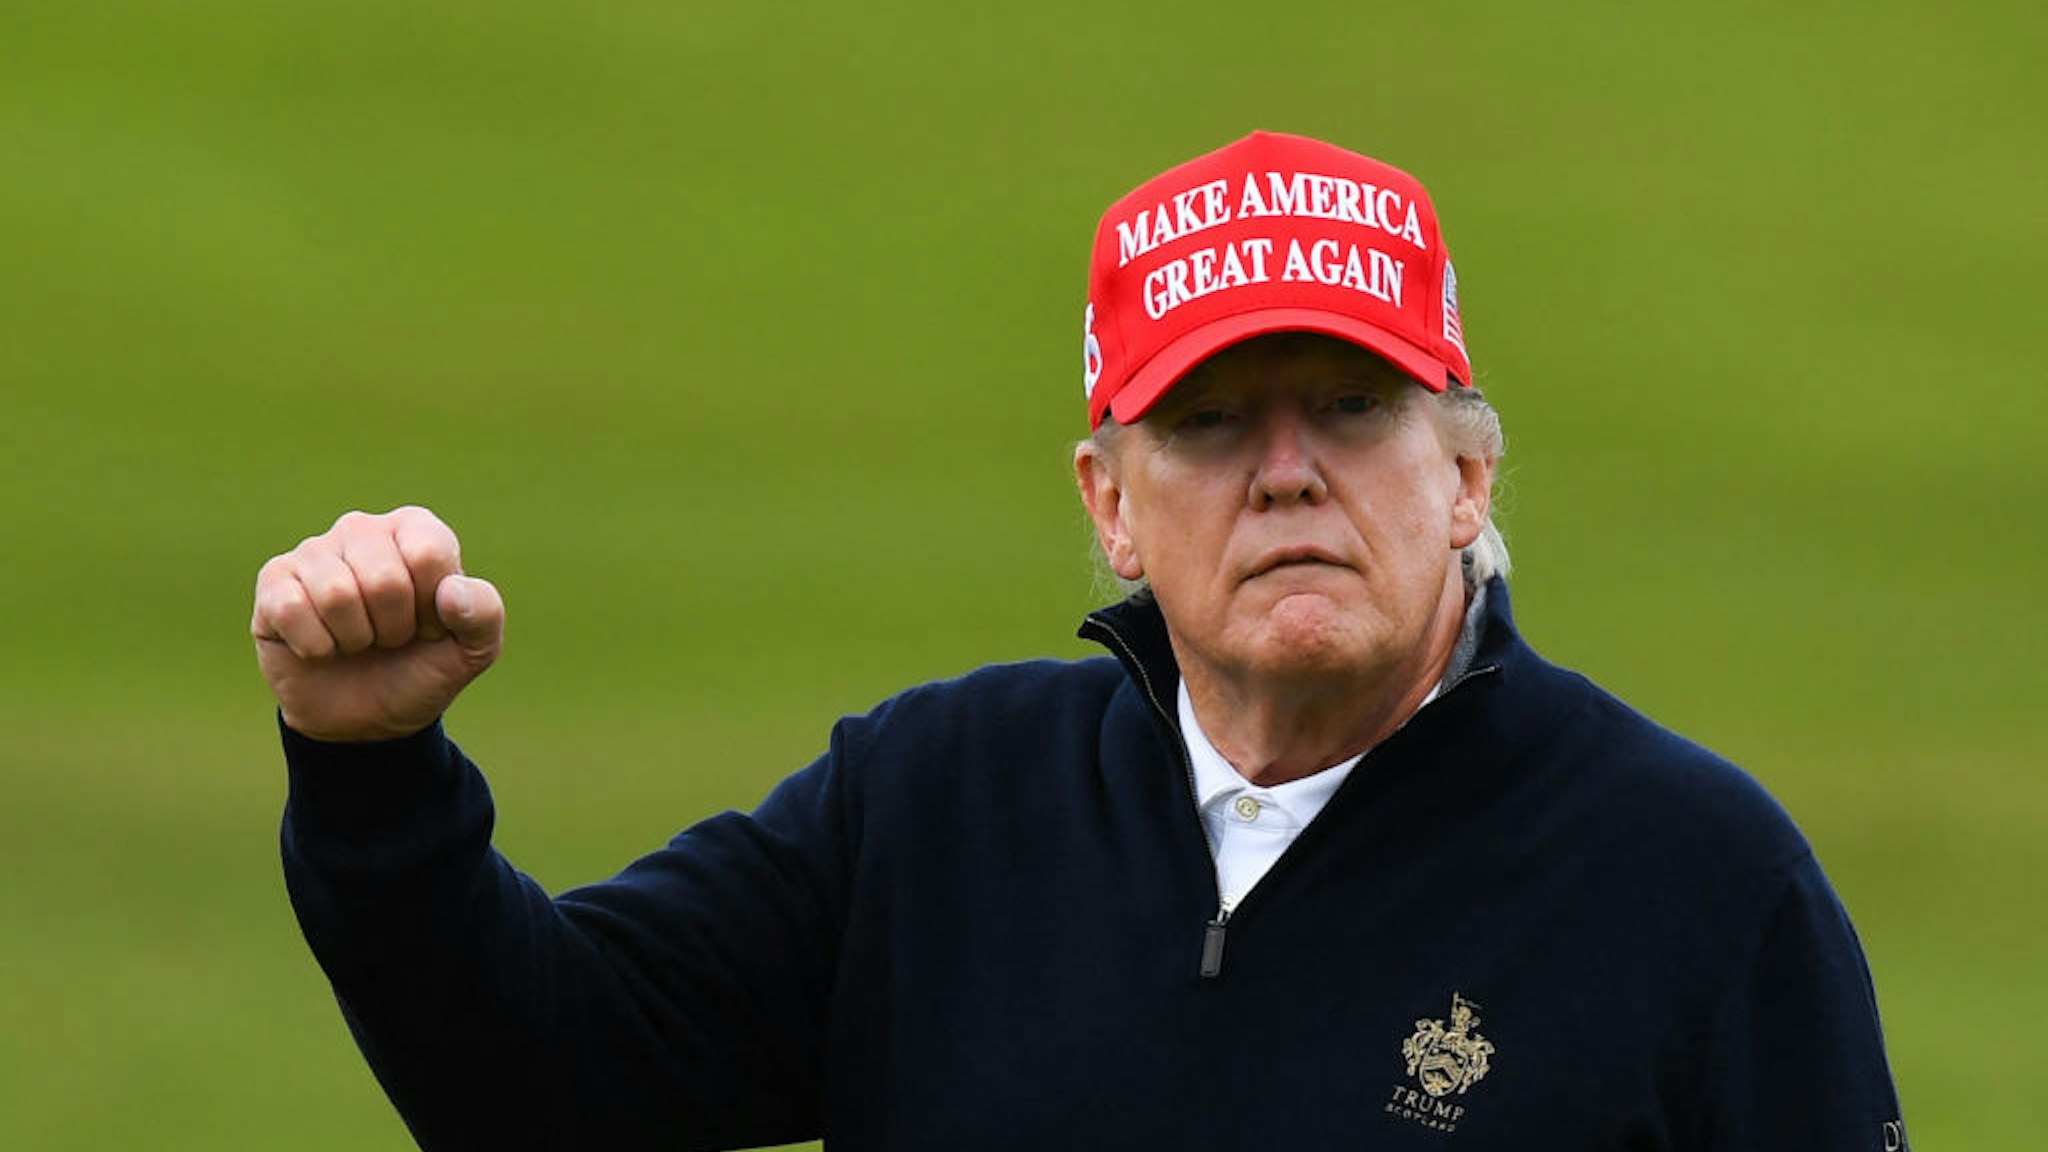 Former US President Donald Trump reacts as he plays golf at the Trump Turnberry Golf Courses, in Turnberry on the west coast of Scotland on May 2, 2023, during the second day of his first visit to the country since losing the Presidency. (Photo by ANDY BUCHANAN / AFP)